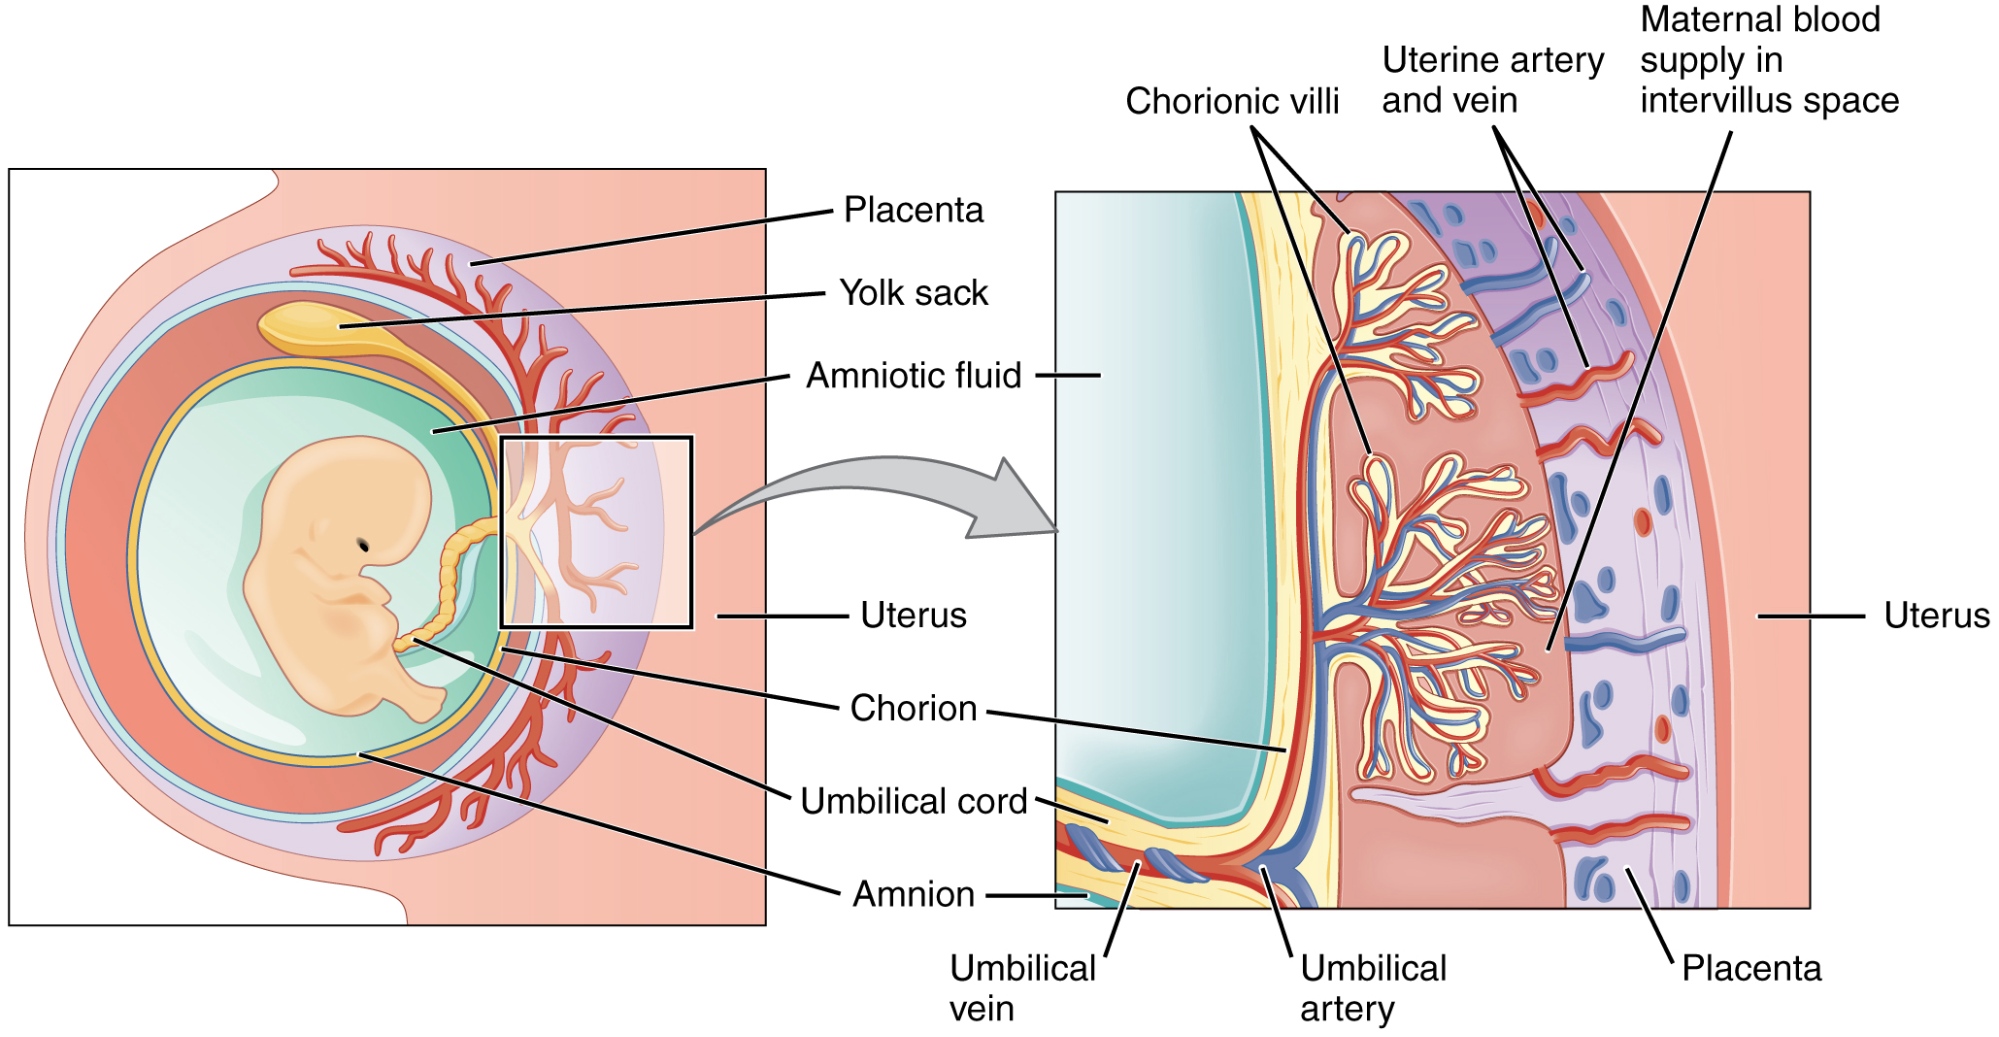 A two-part diagram shows (at left) the position of the developing fetus within the uterus, with umbilical cord connecting it to the placenta; and (at right) the structure of the placenta, with umbilical blood entering the chorionic villi, where it comes in close proximity to maternal blood.